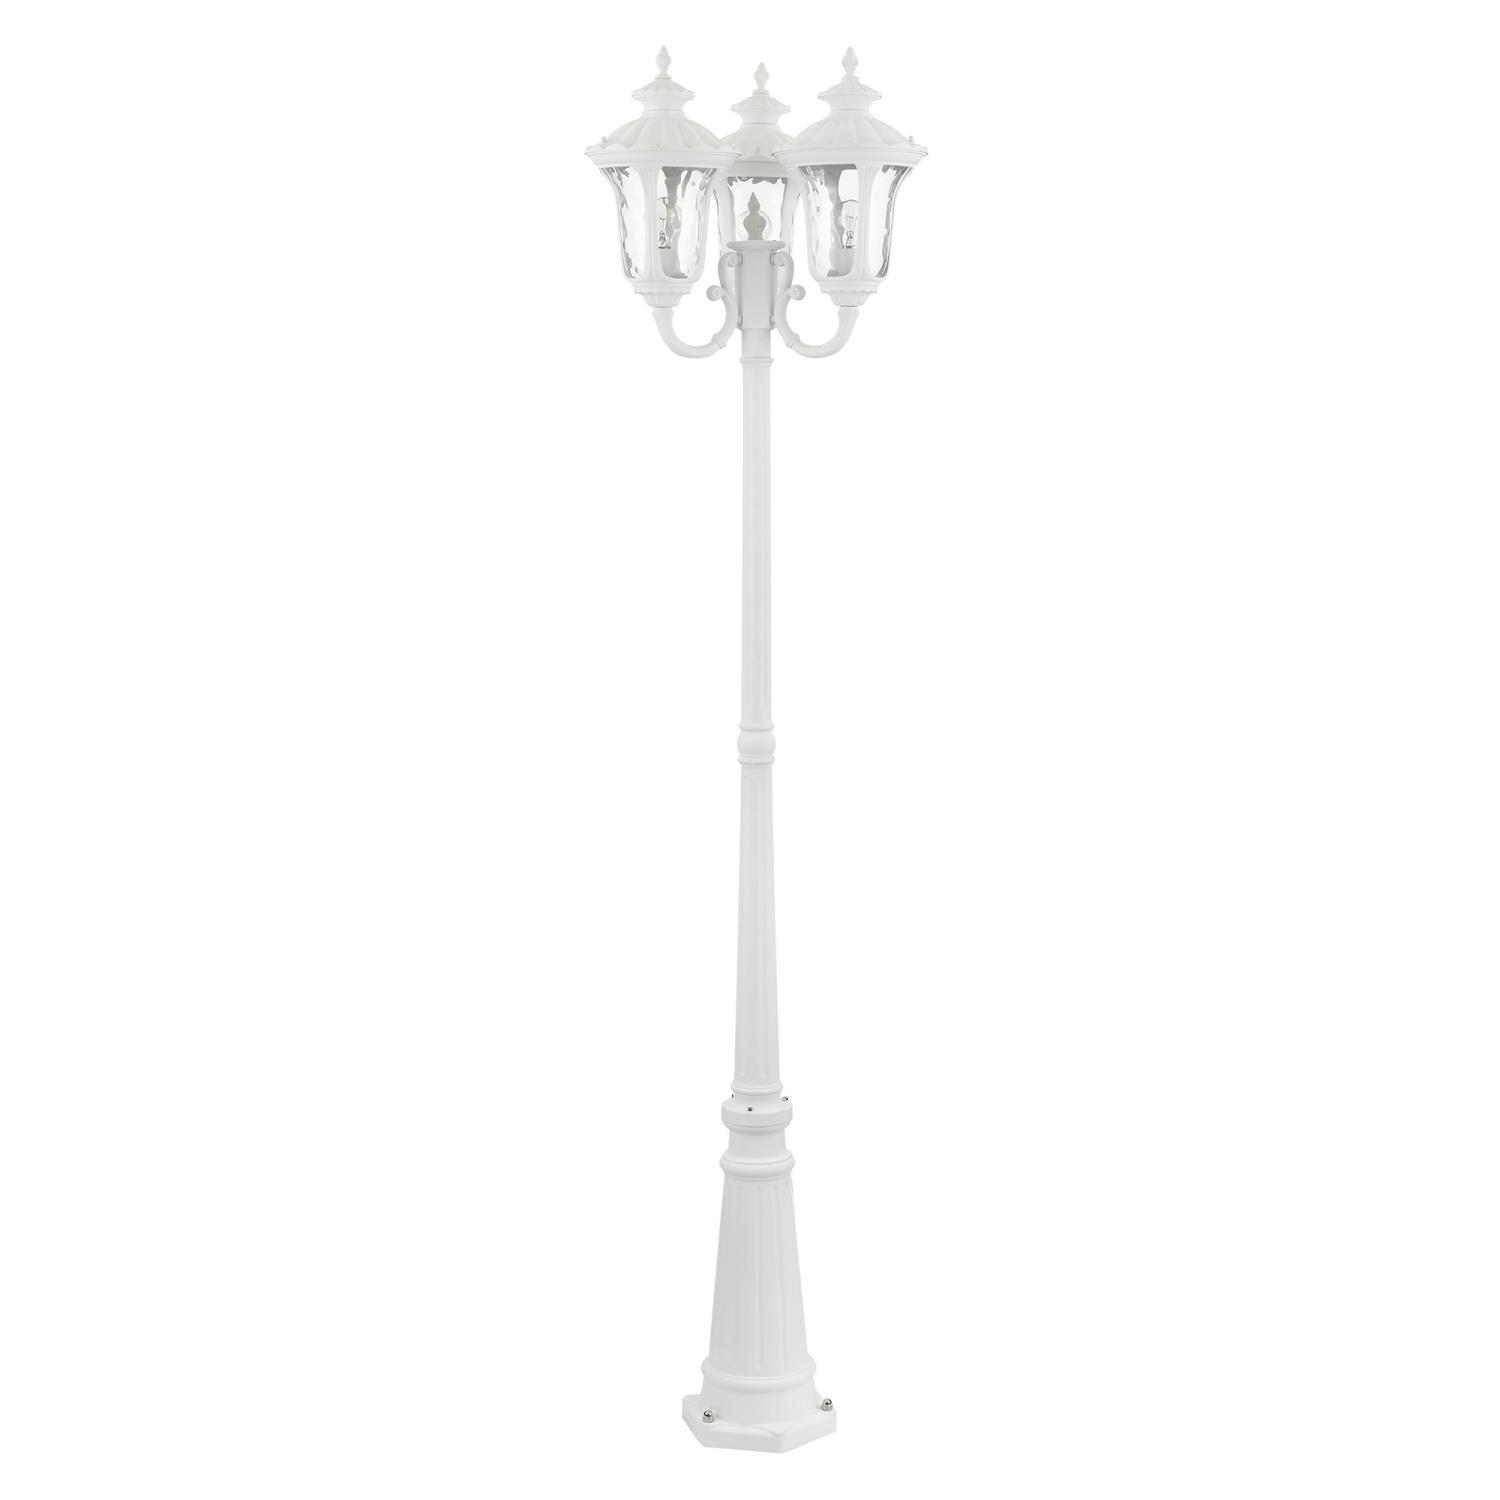 Livex Lighting 3 Light Outdoor Post Light With Textured White Finish 7866-13 - image 2 of 7